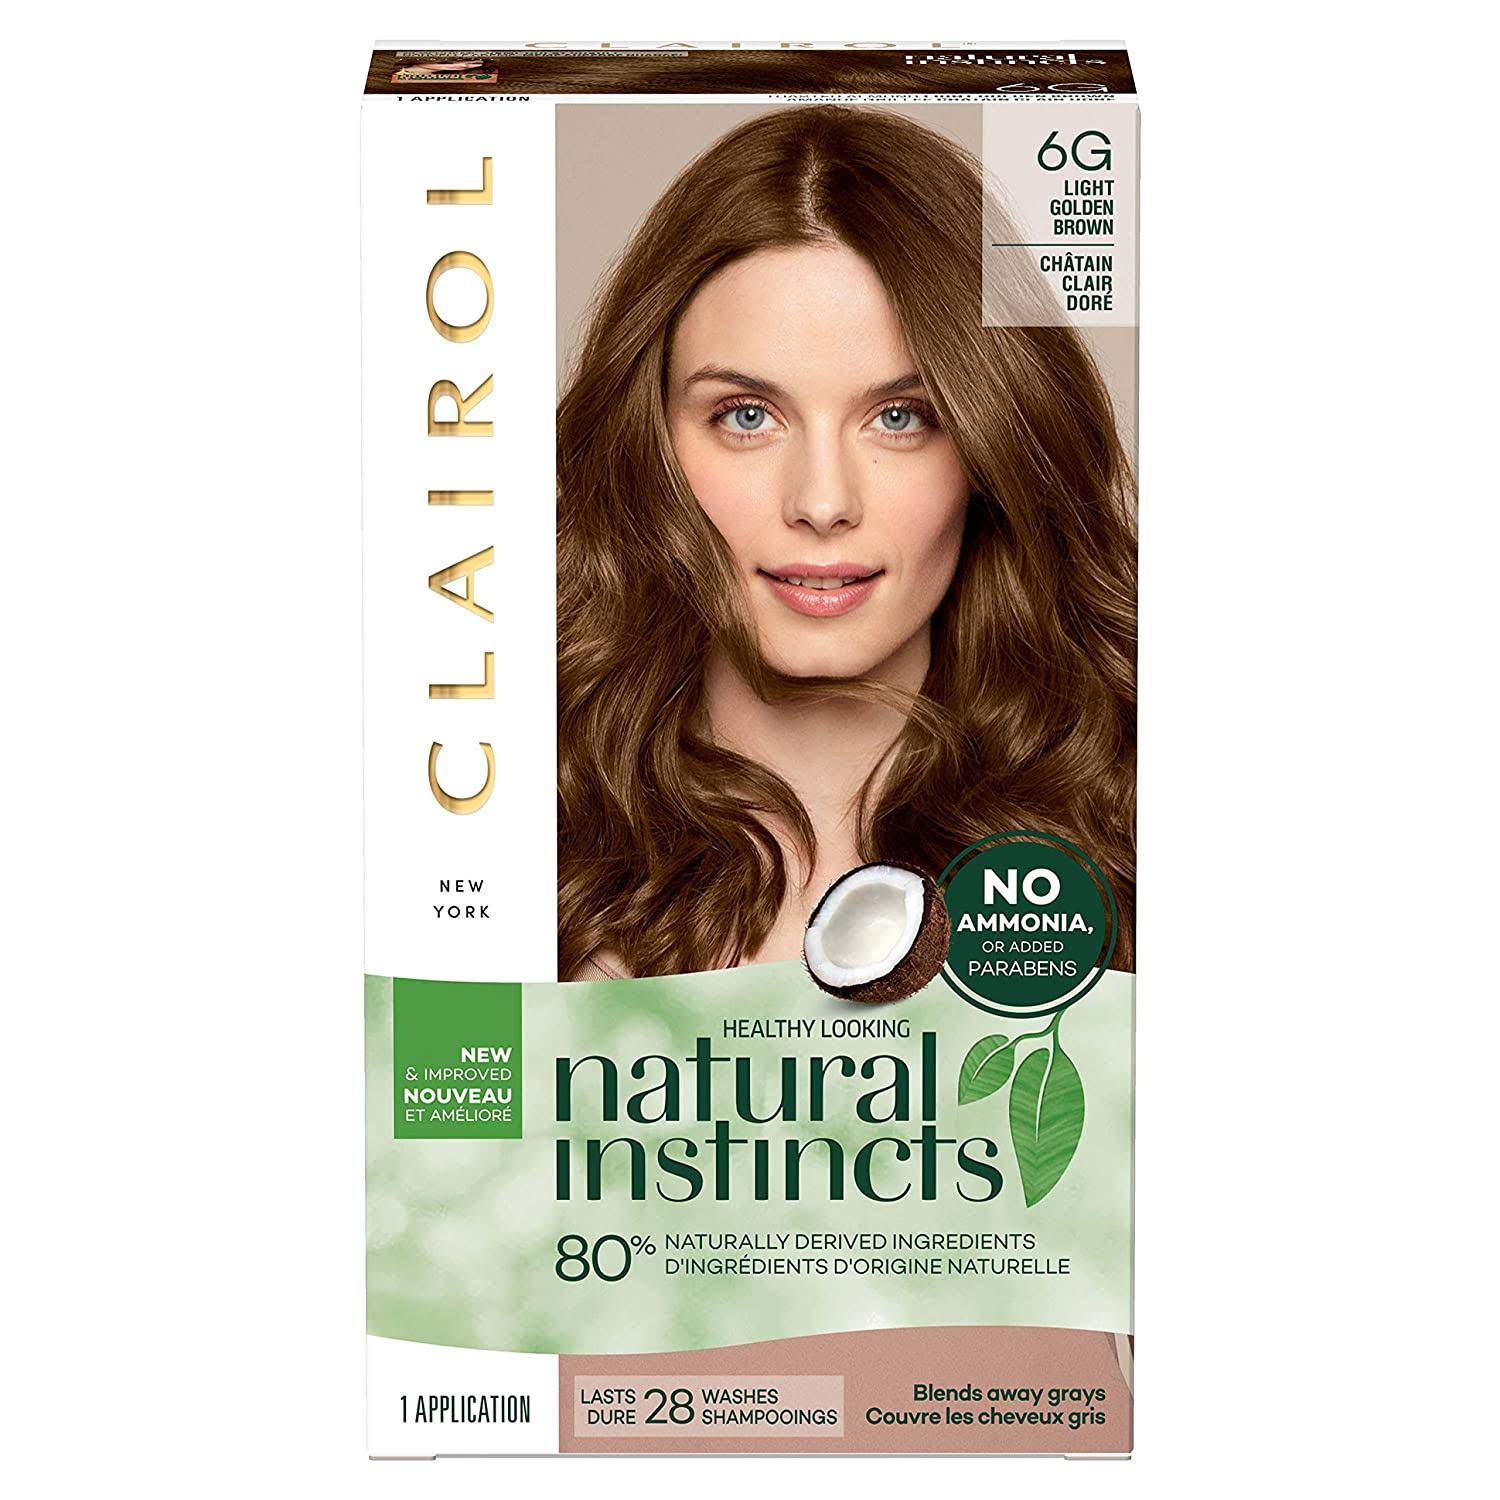 Clairol Natural Instincts Semi-Permanent, 6G Light Golden Brown, Toast